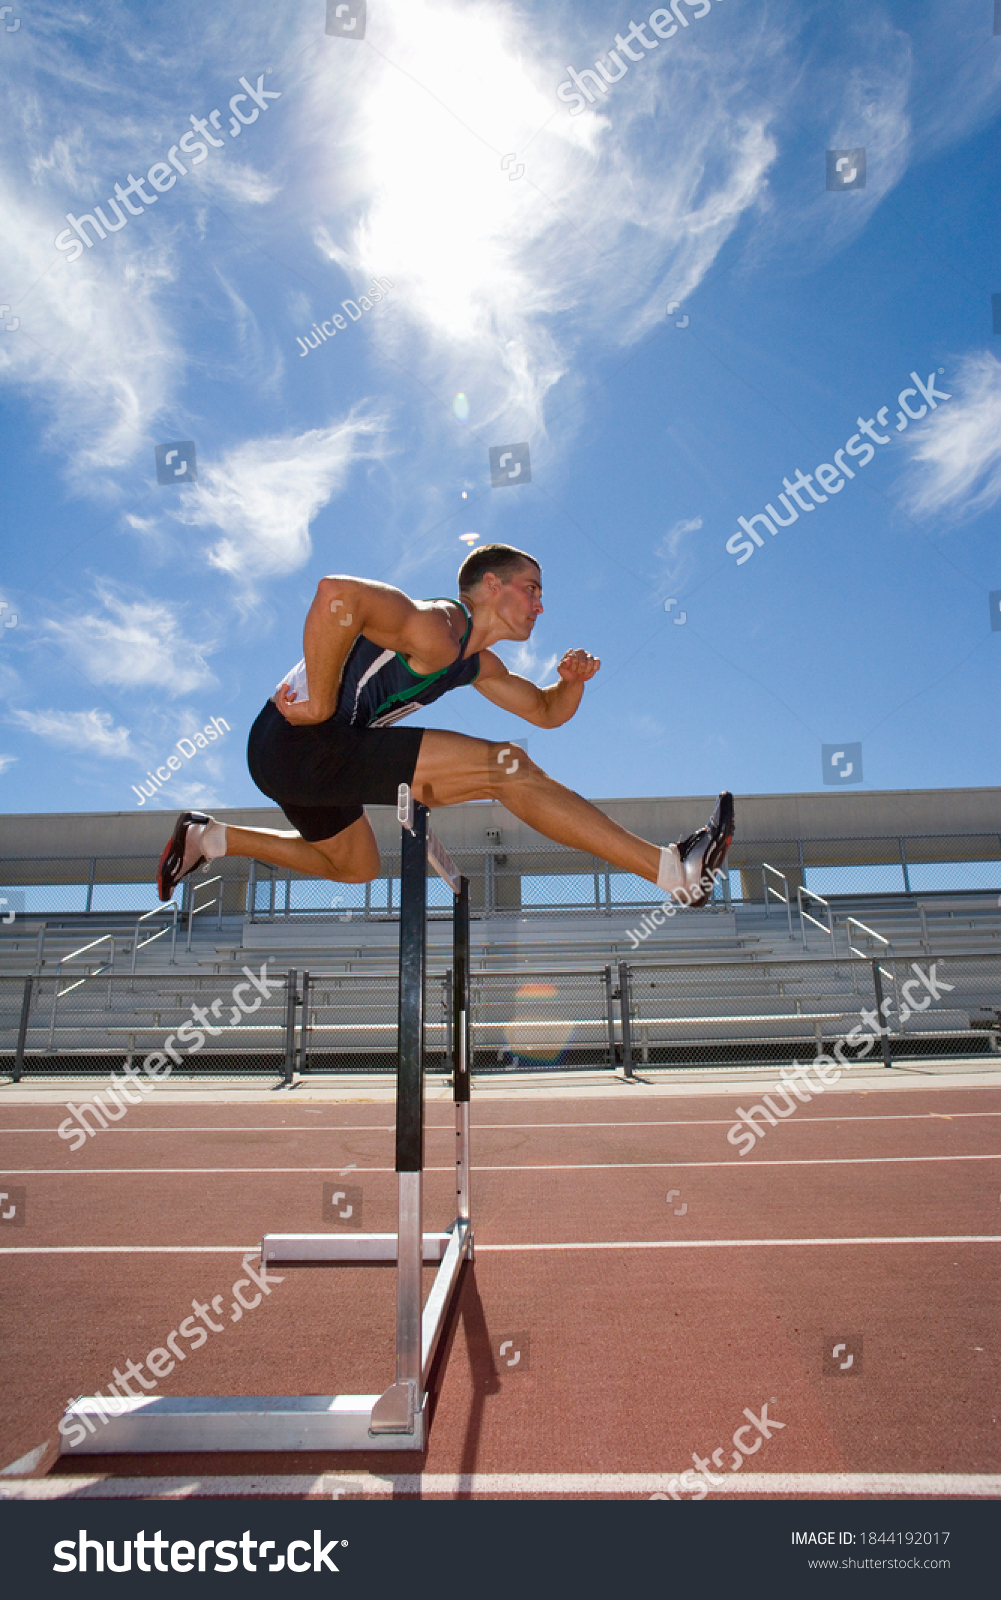 Side view of a male athlete jumping over a hurdle in the race on running track #1844192017